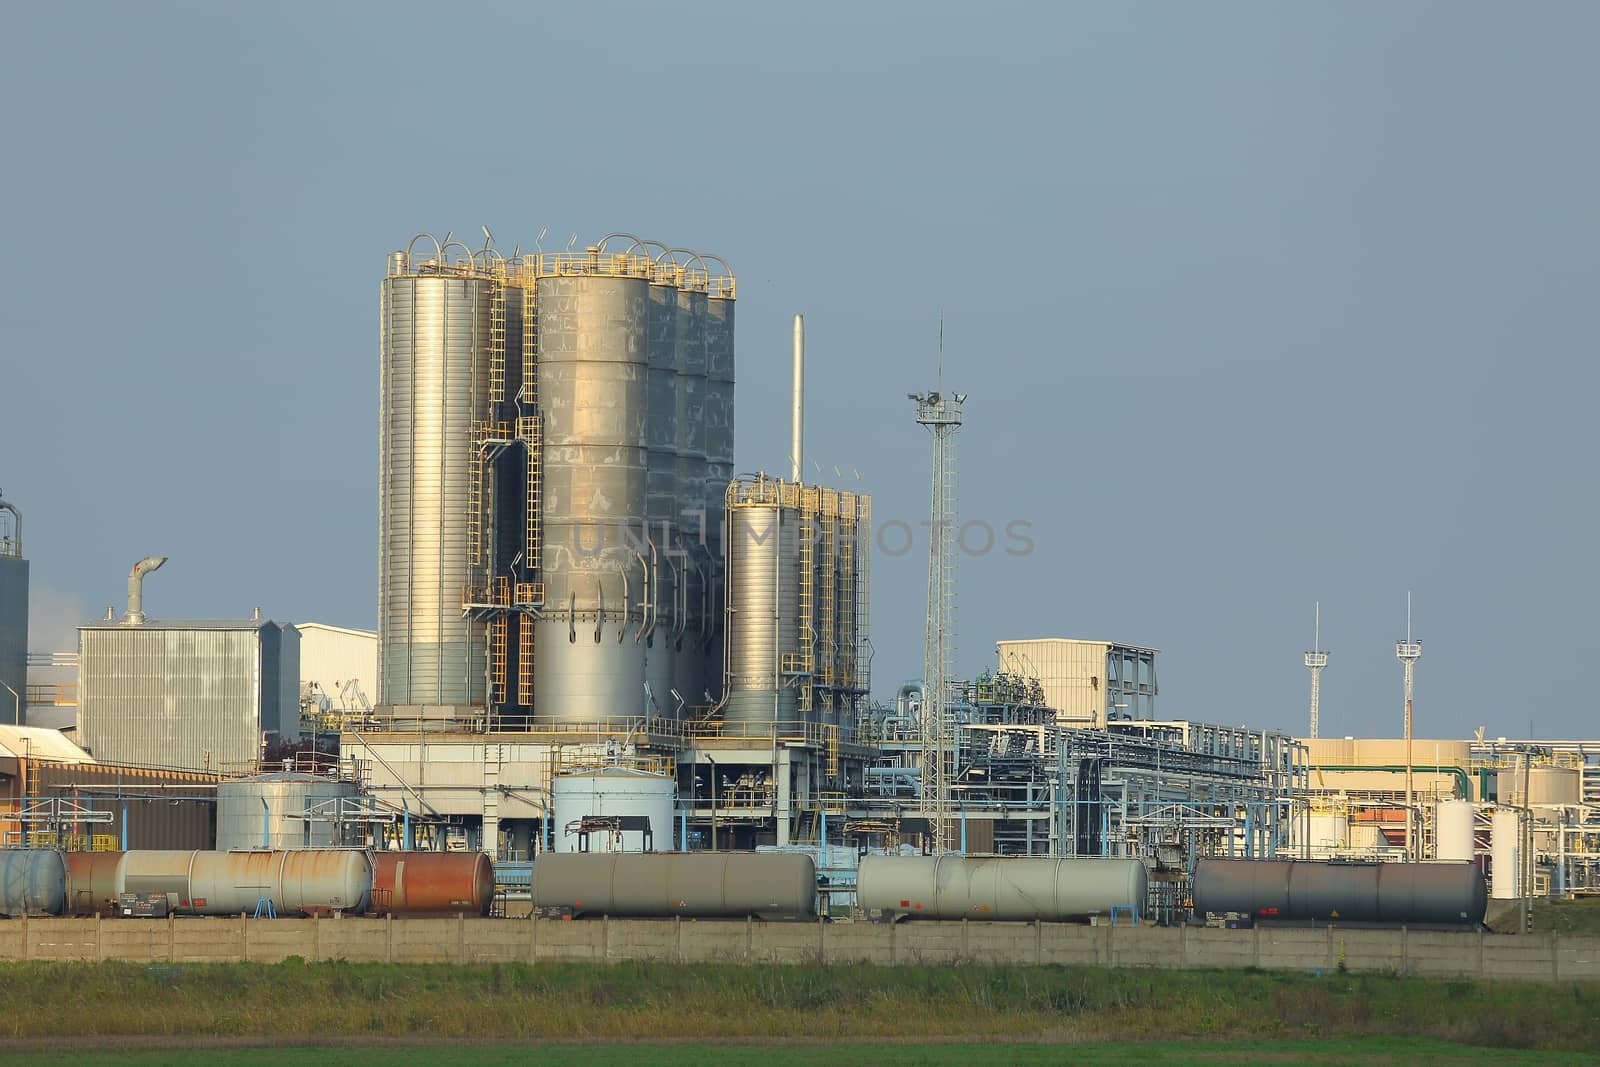 Oil refinery buildings with big silos